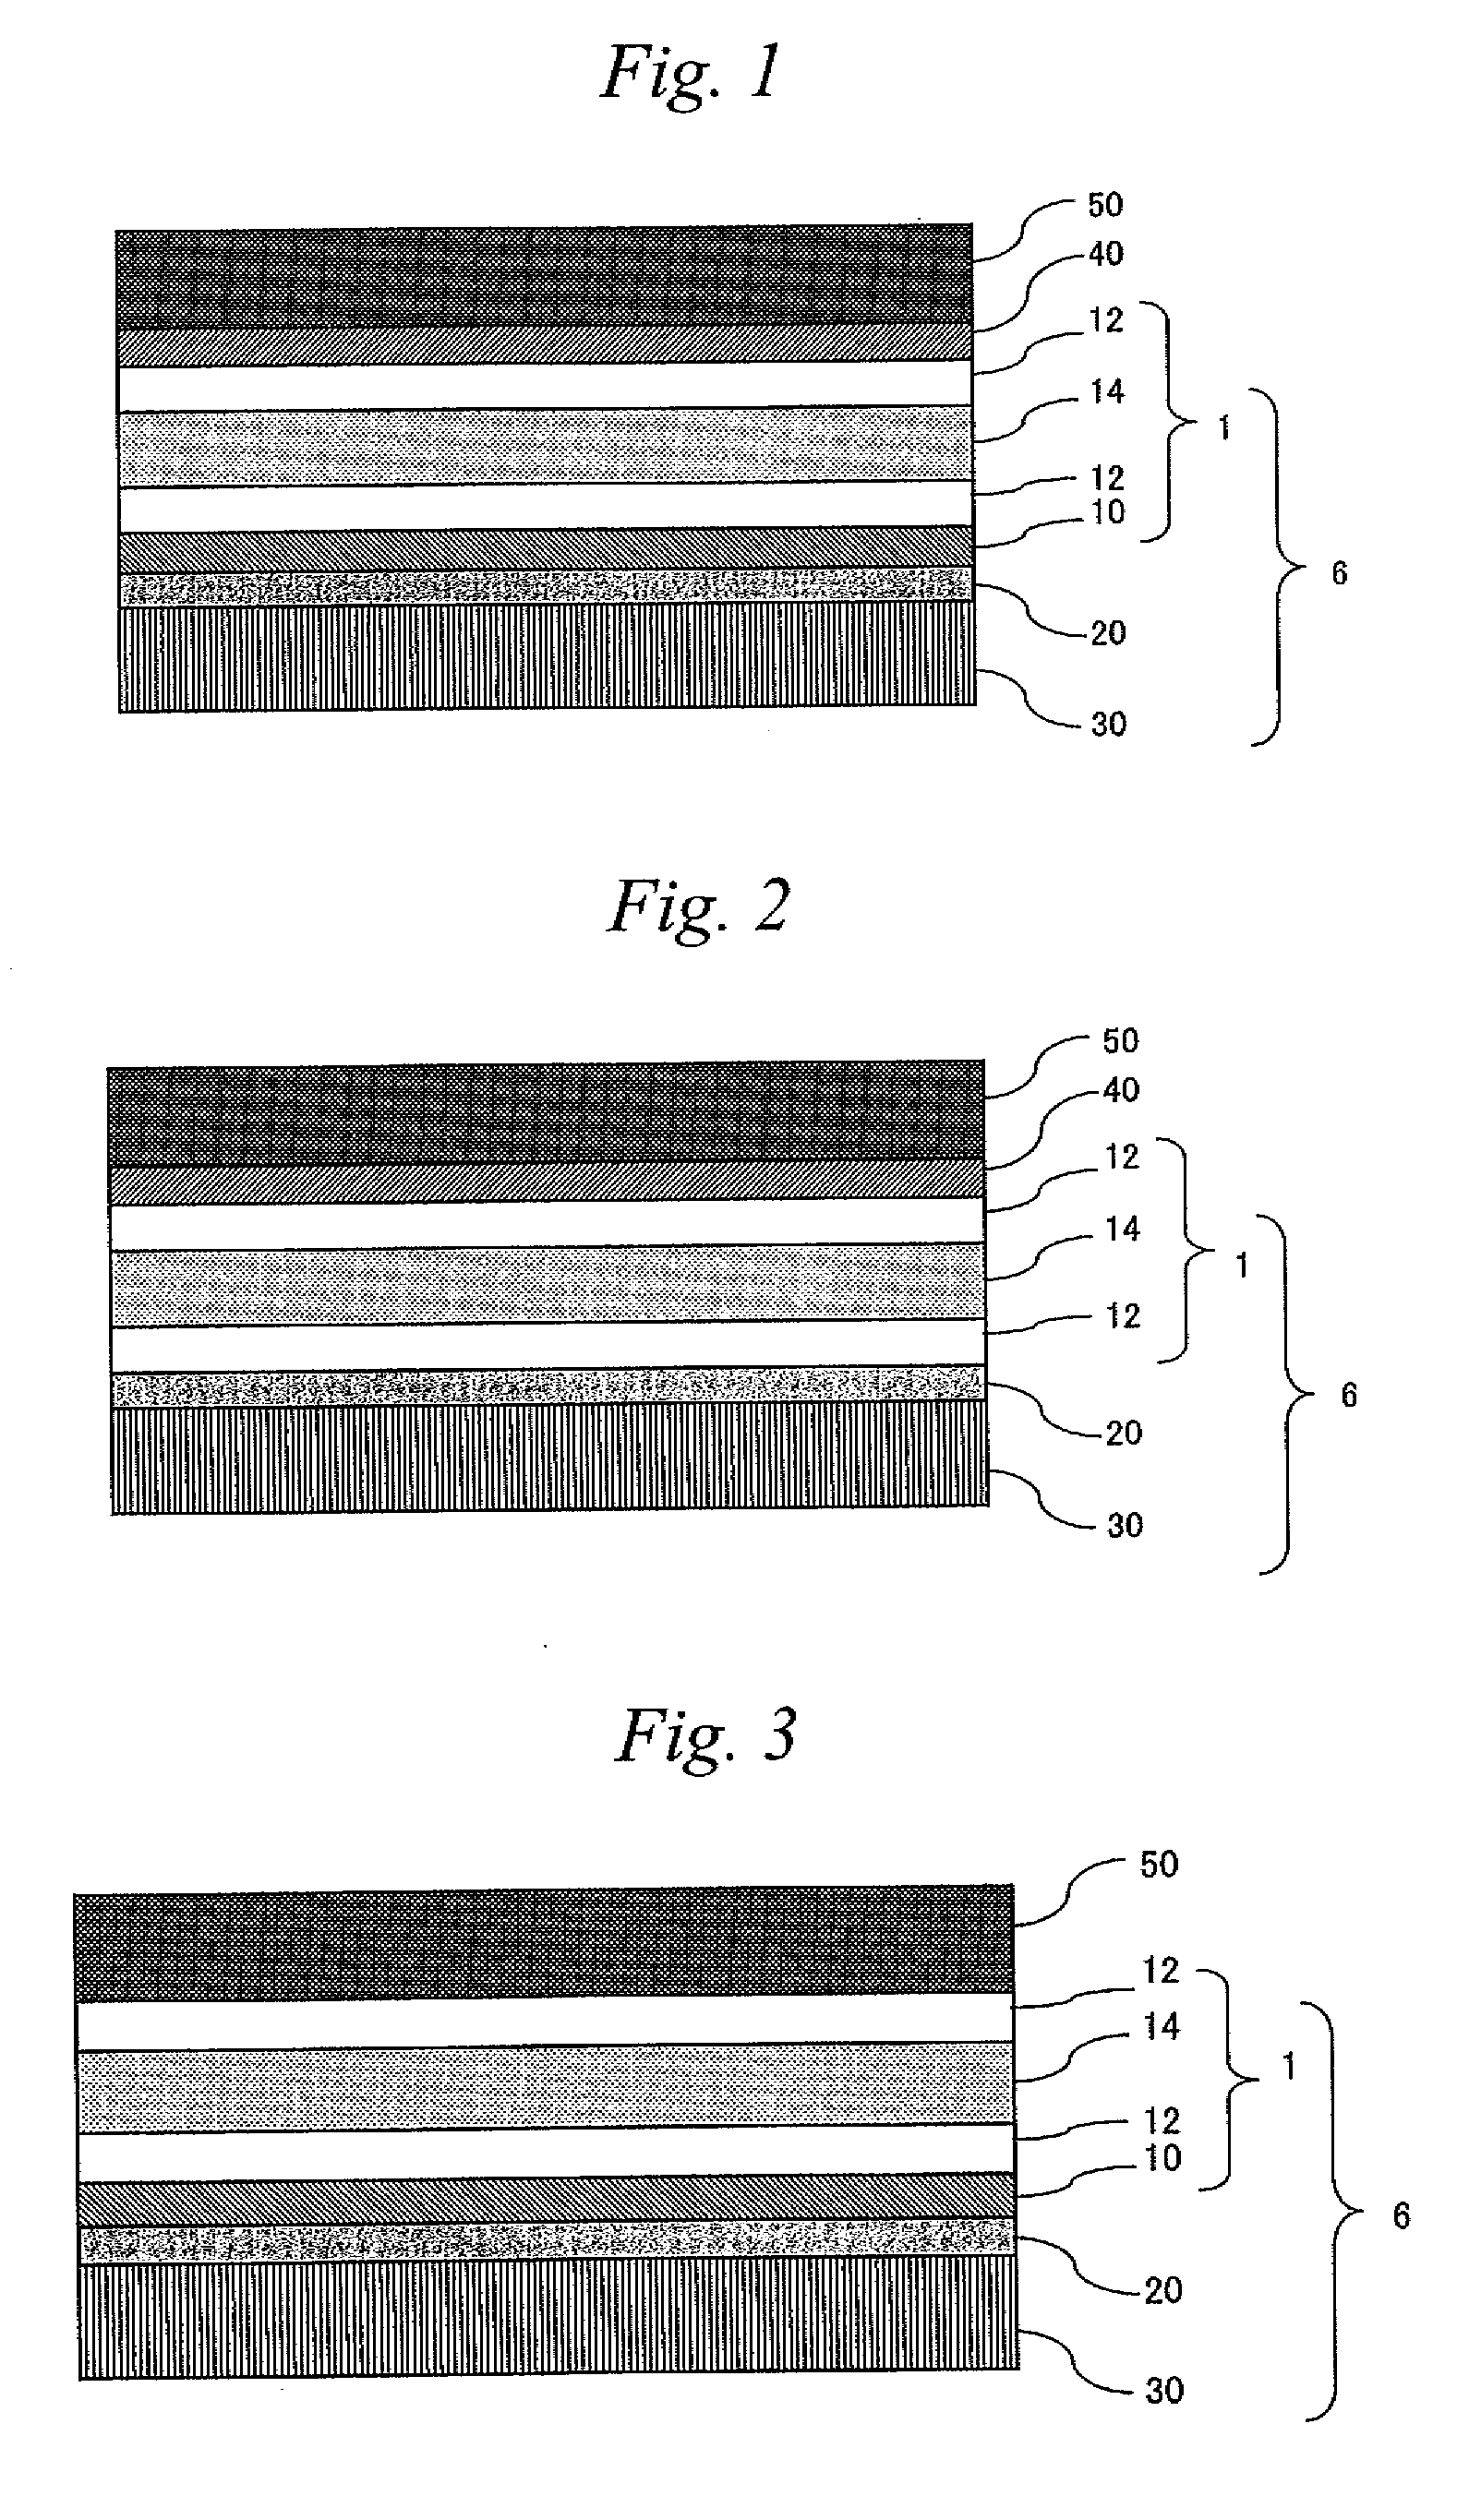 Backlight system and optical sheet with pressure-sensitive adhesive